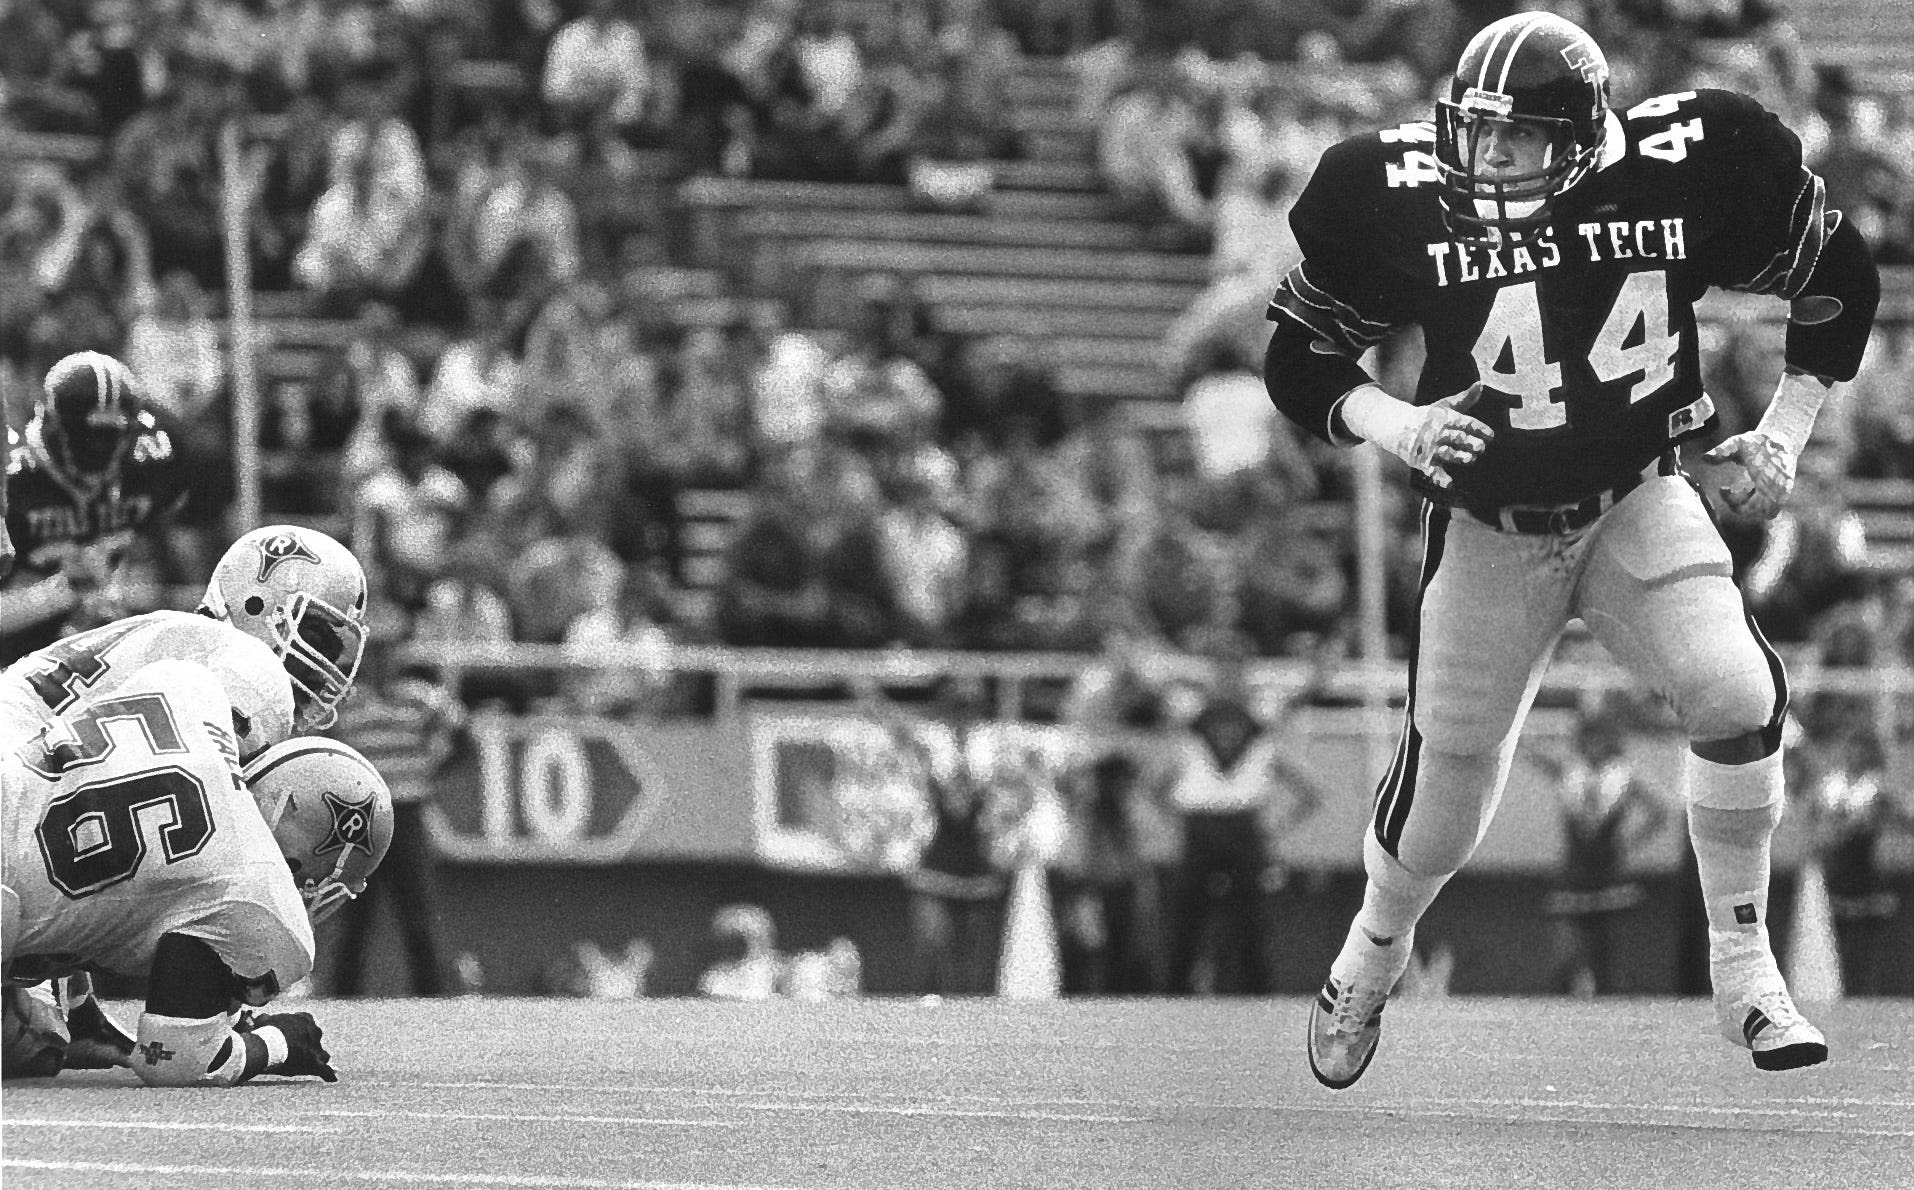 Texas Tech football great Brad Hastings selected for SWC Hall of Fame